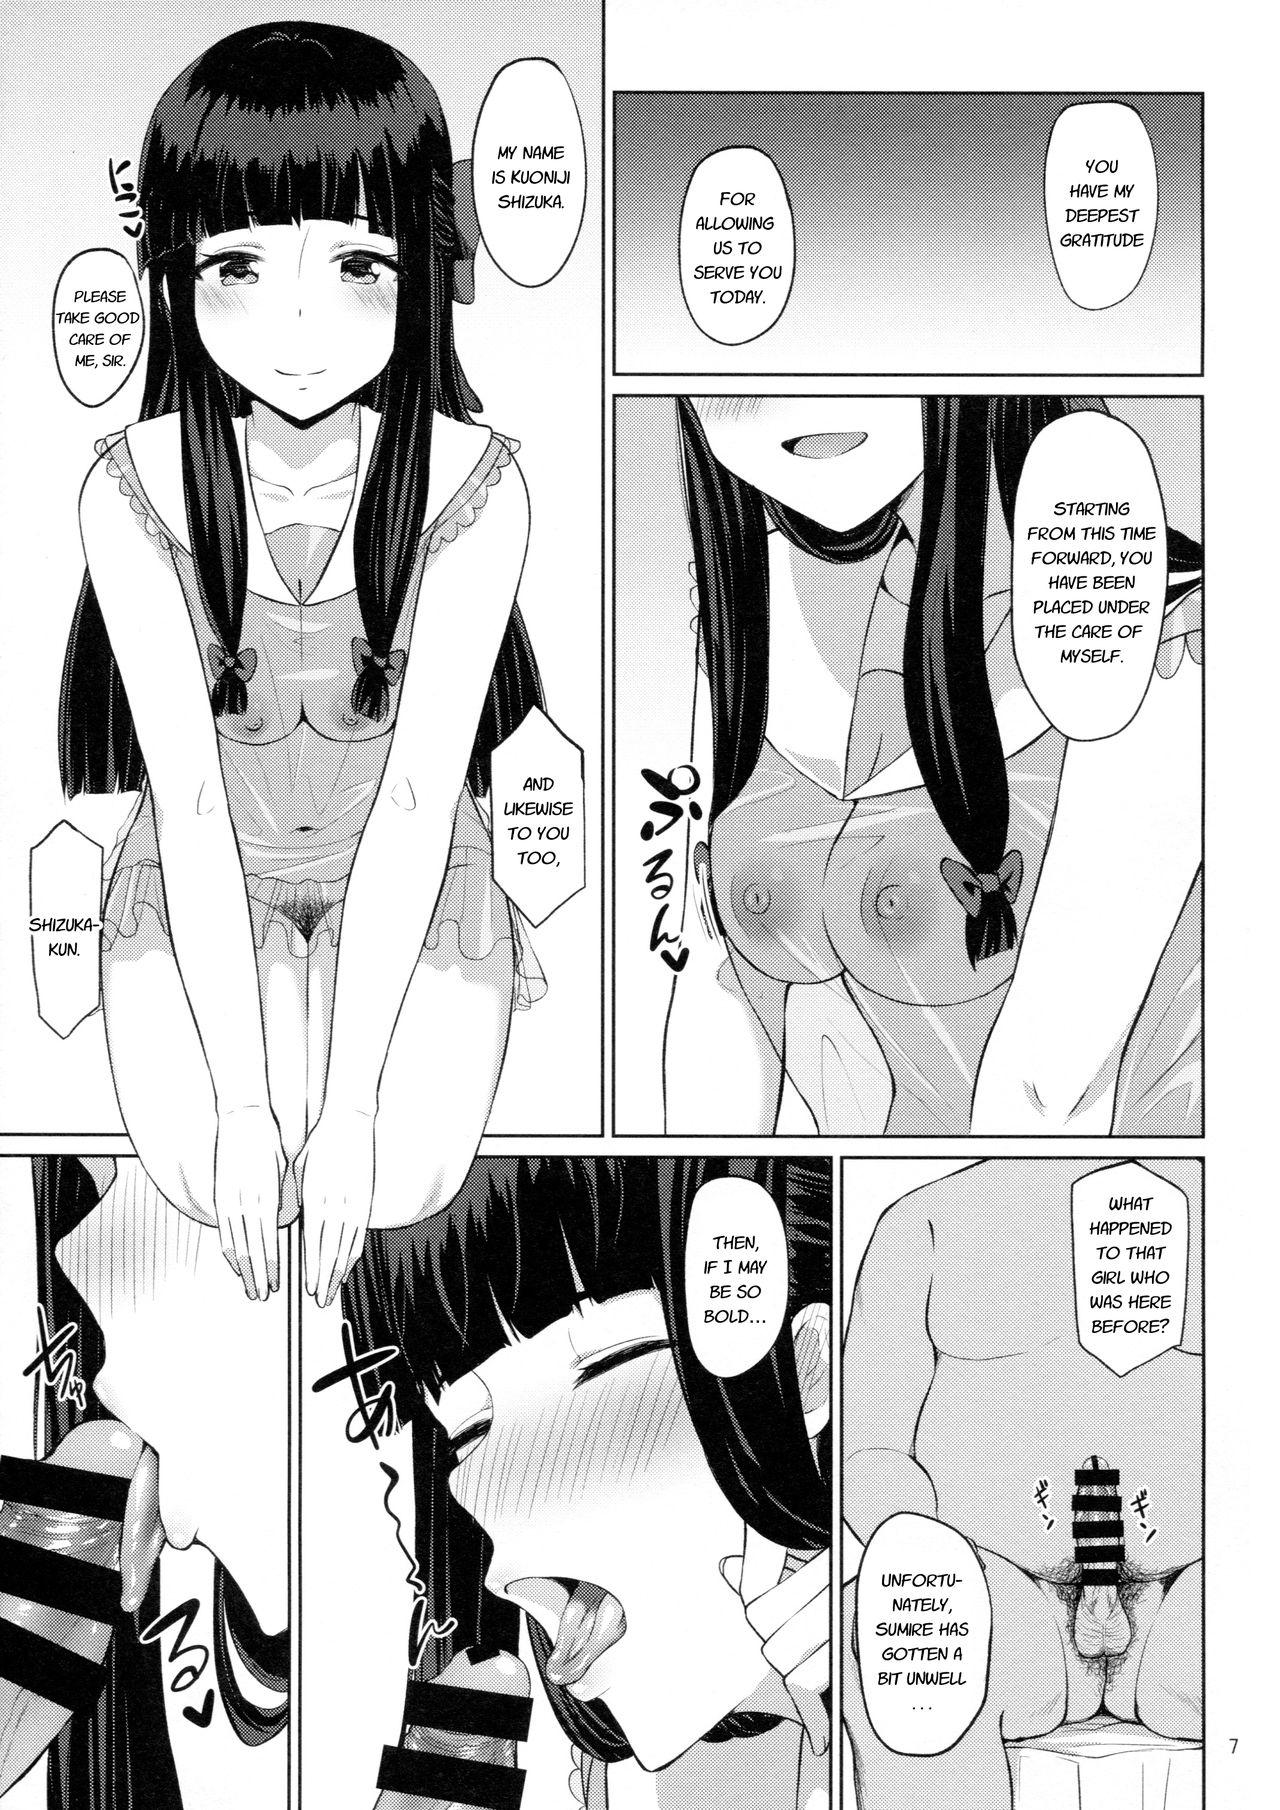 Funny D.EMOTION - Tokyo 7th sisters Pussylick - Page 6